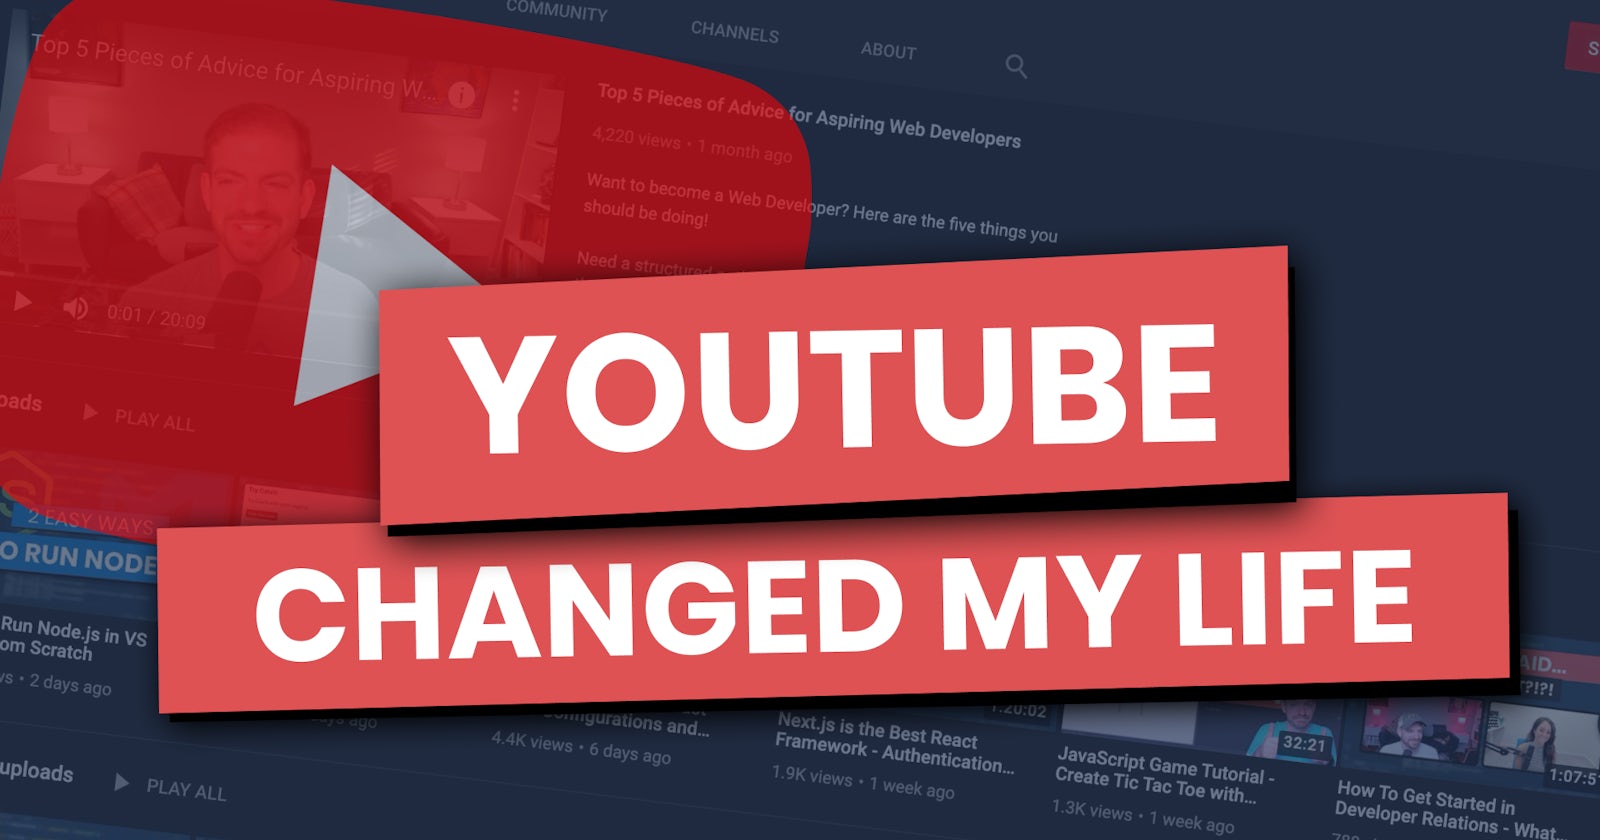 5 Things I've Learned from Creating YouTube Videos